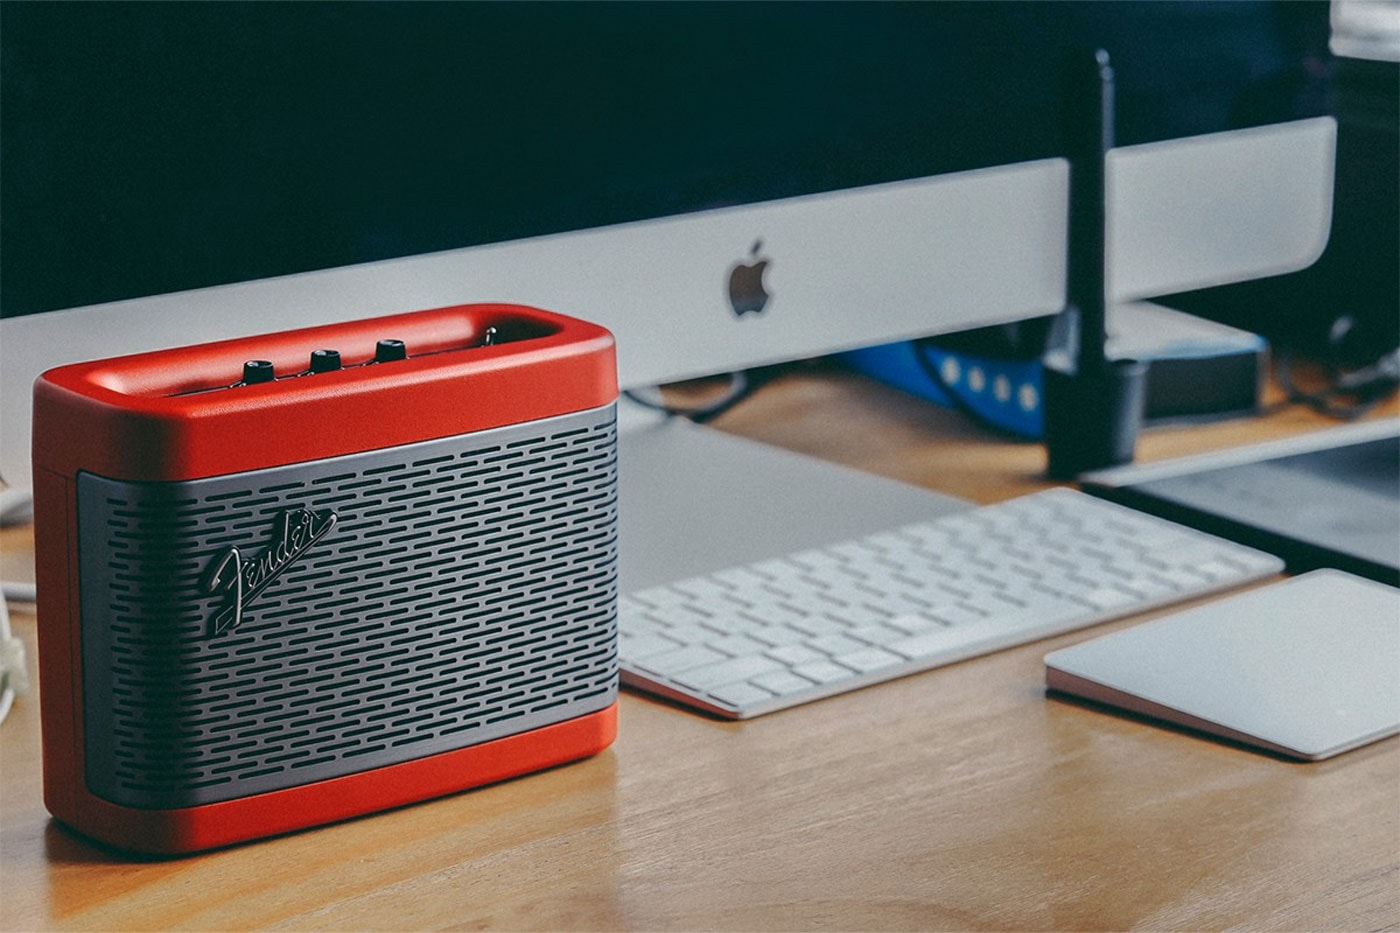 Fender Introduces Newport 2 Portable Bluetooth Speakers asia BT 5.0 party mode silverface guitar amp release info date price